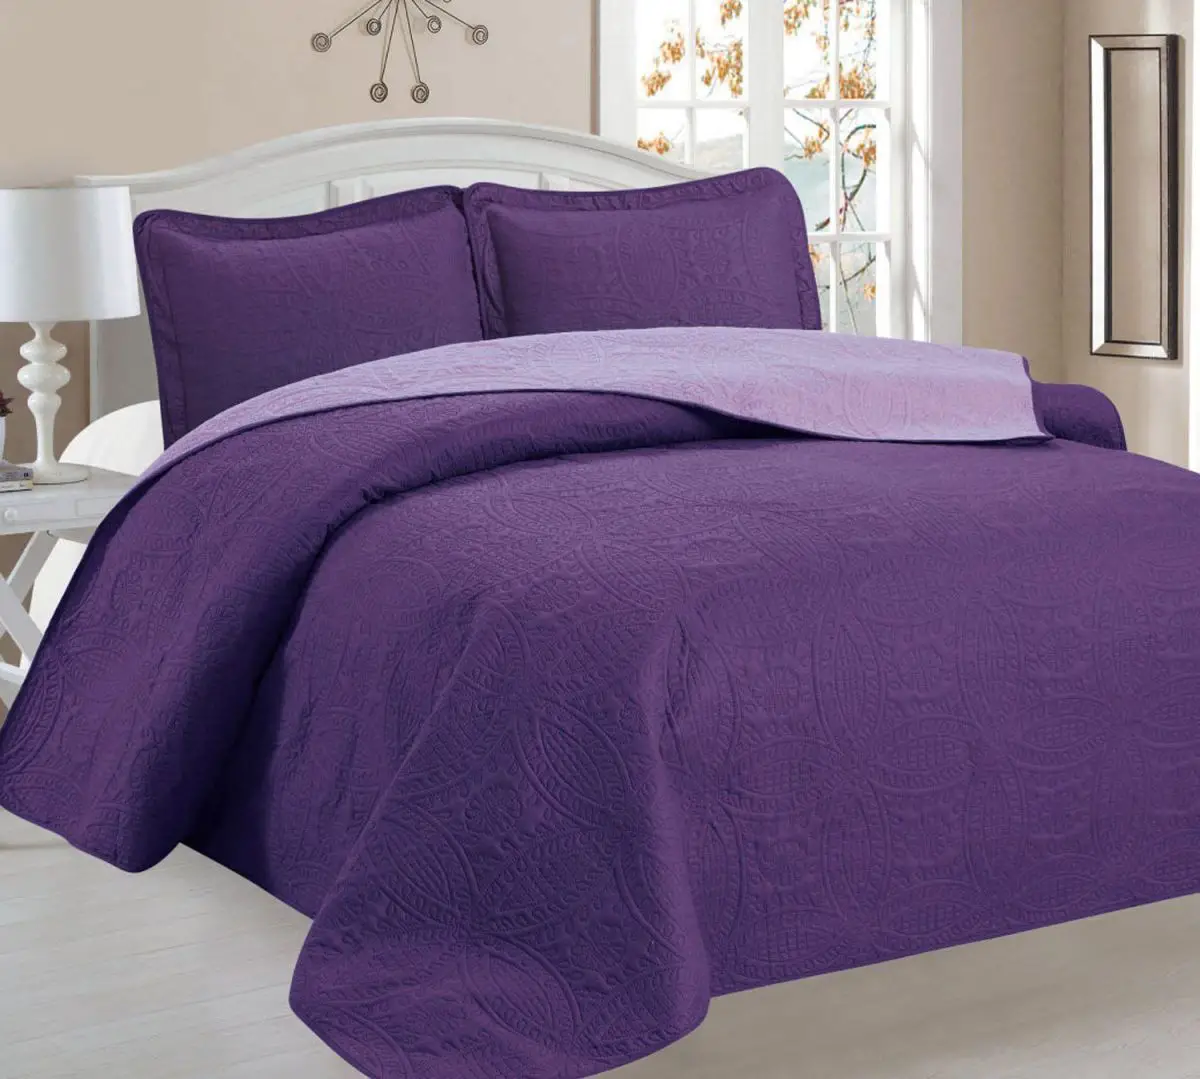 Twin Full Queen King Size Bed Purple Lavender Reversible 3 pc Quilt Set ...